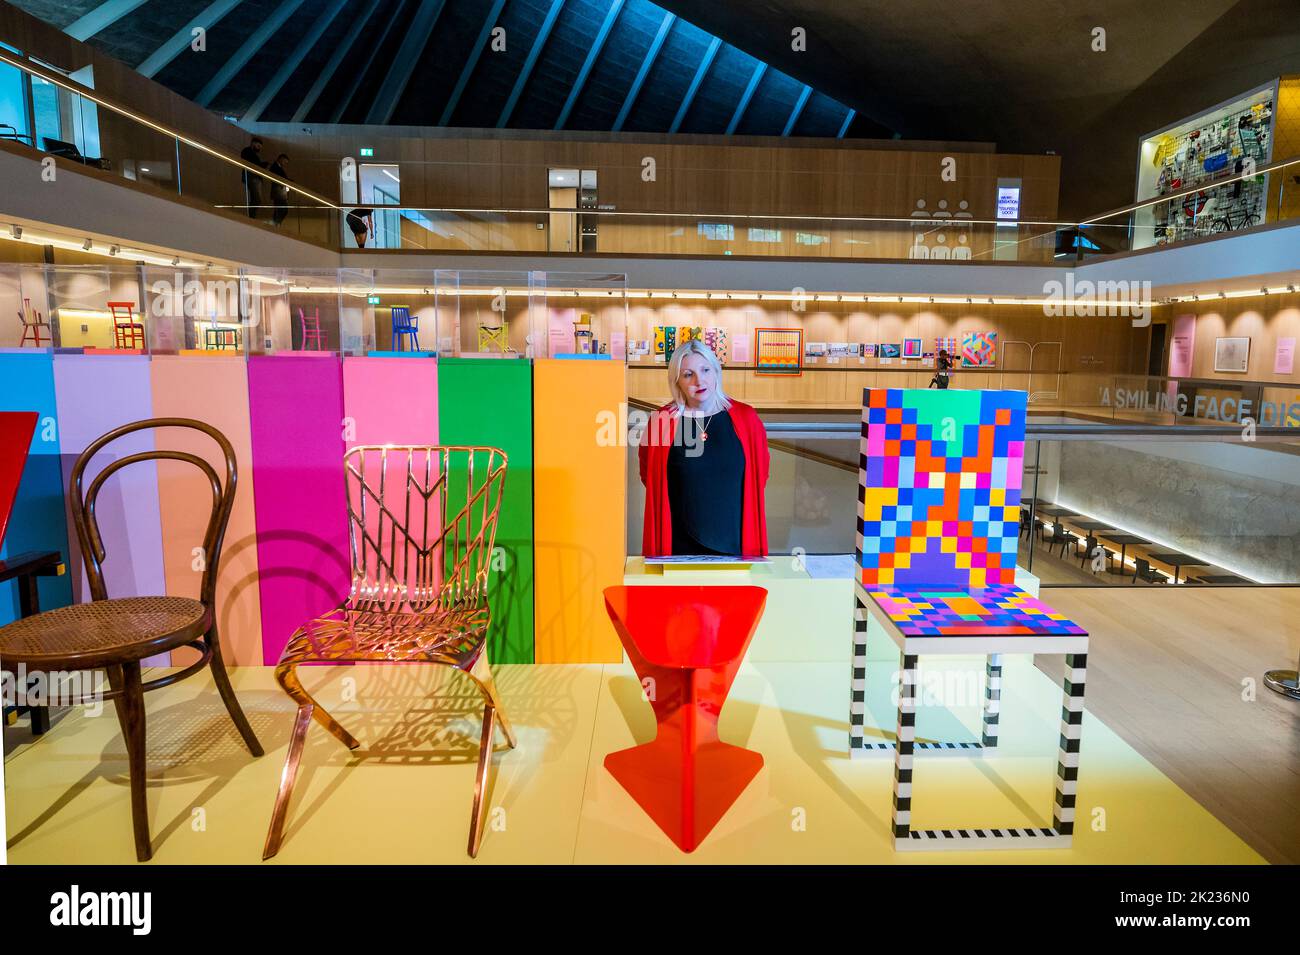 London, UK. 22nd Sep, 2022. A zone dedicated to the artists fascination with chairs, incl Untitled 1, 2022 - Yinka Ilori: Parables for Happiness at the Design Museum. The first museum display exploring the work of artist and designer Yinka Ilori. With over 100 objects, ranging from artworks, photographs and furniture, to textiles, books and personal possessions. It runs from 15 SEPT 2022 - 25 JUNE 2023. Credit: Guy Bell/Alamy Live News Stock Photo